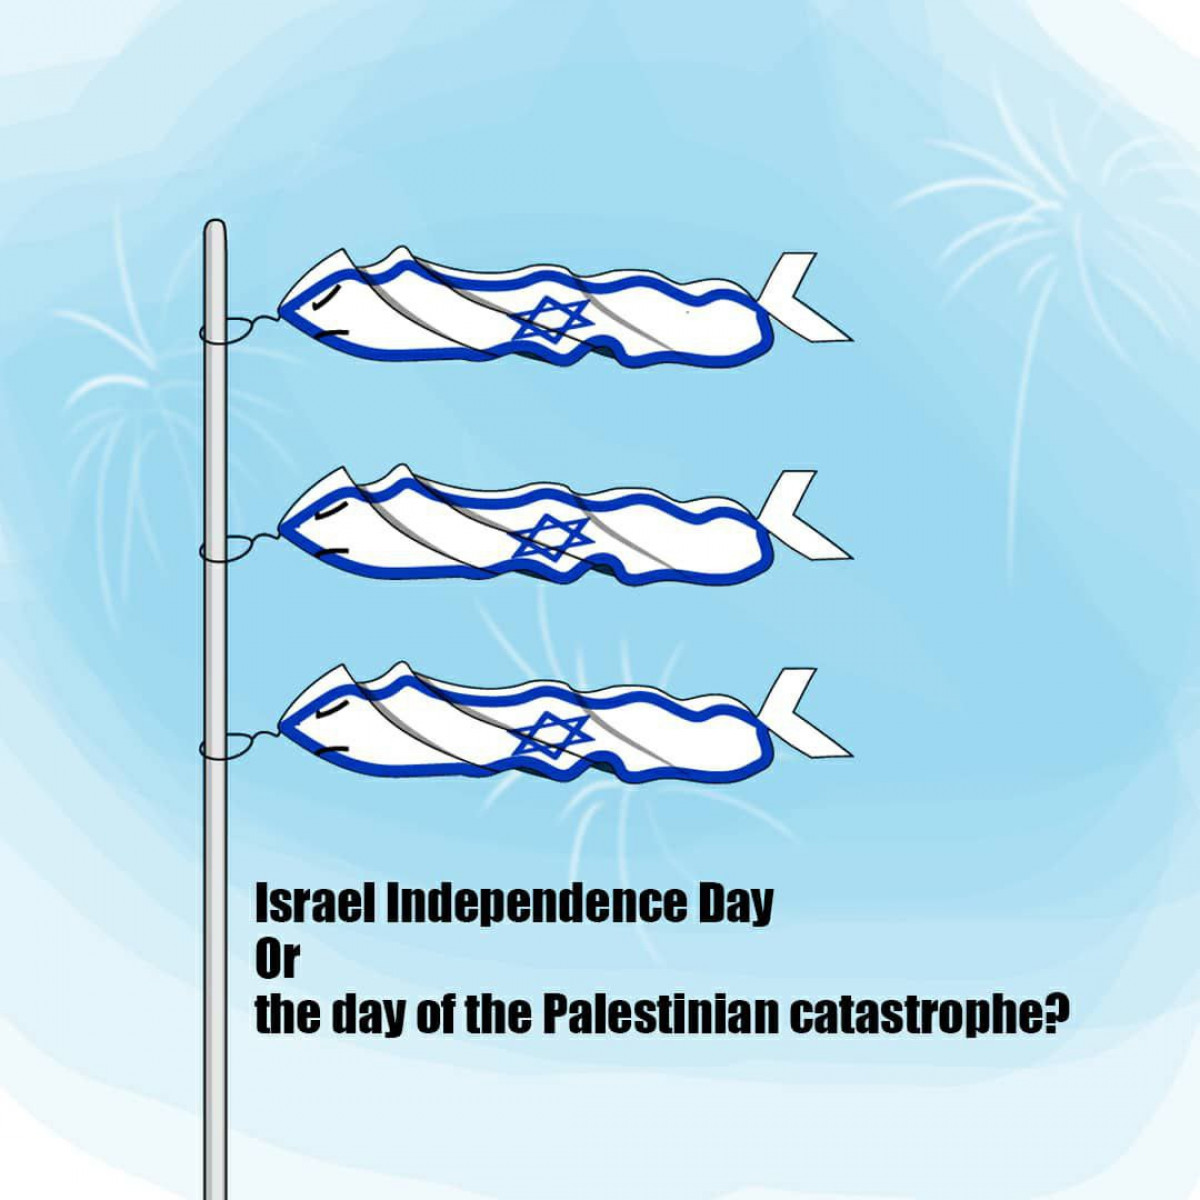 Israel independence day or the day of the Palestinian catastrophe?